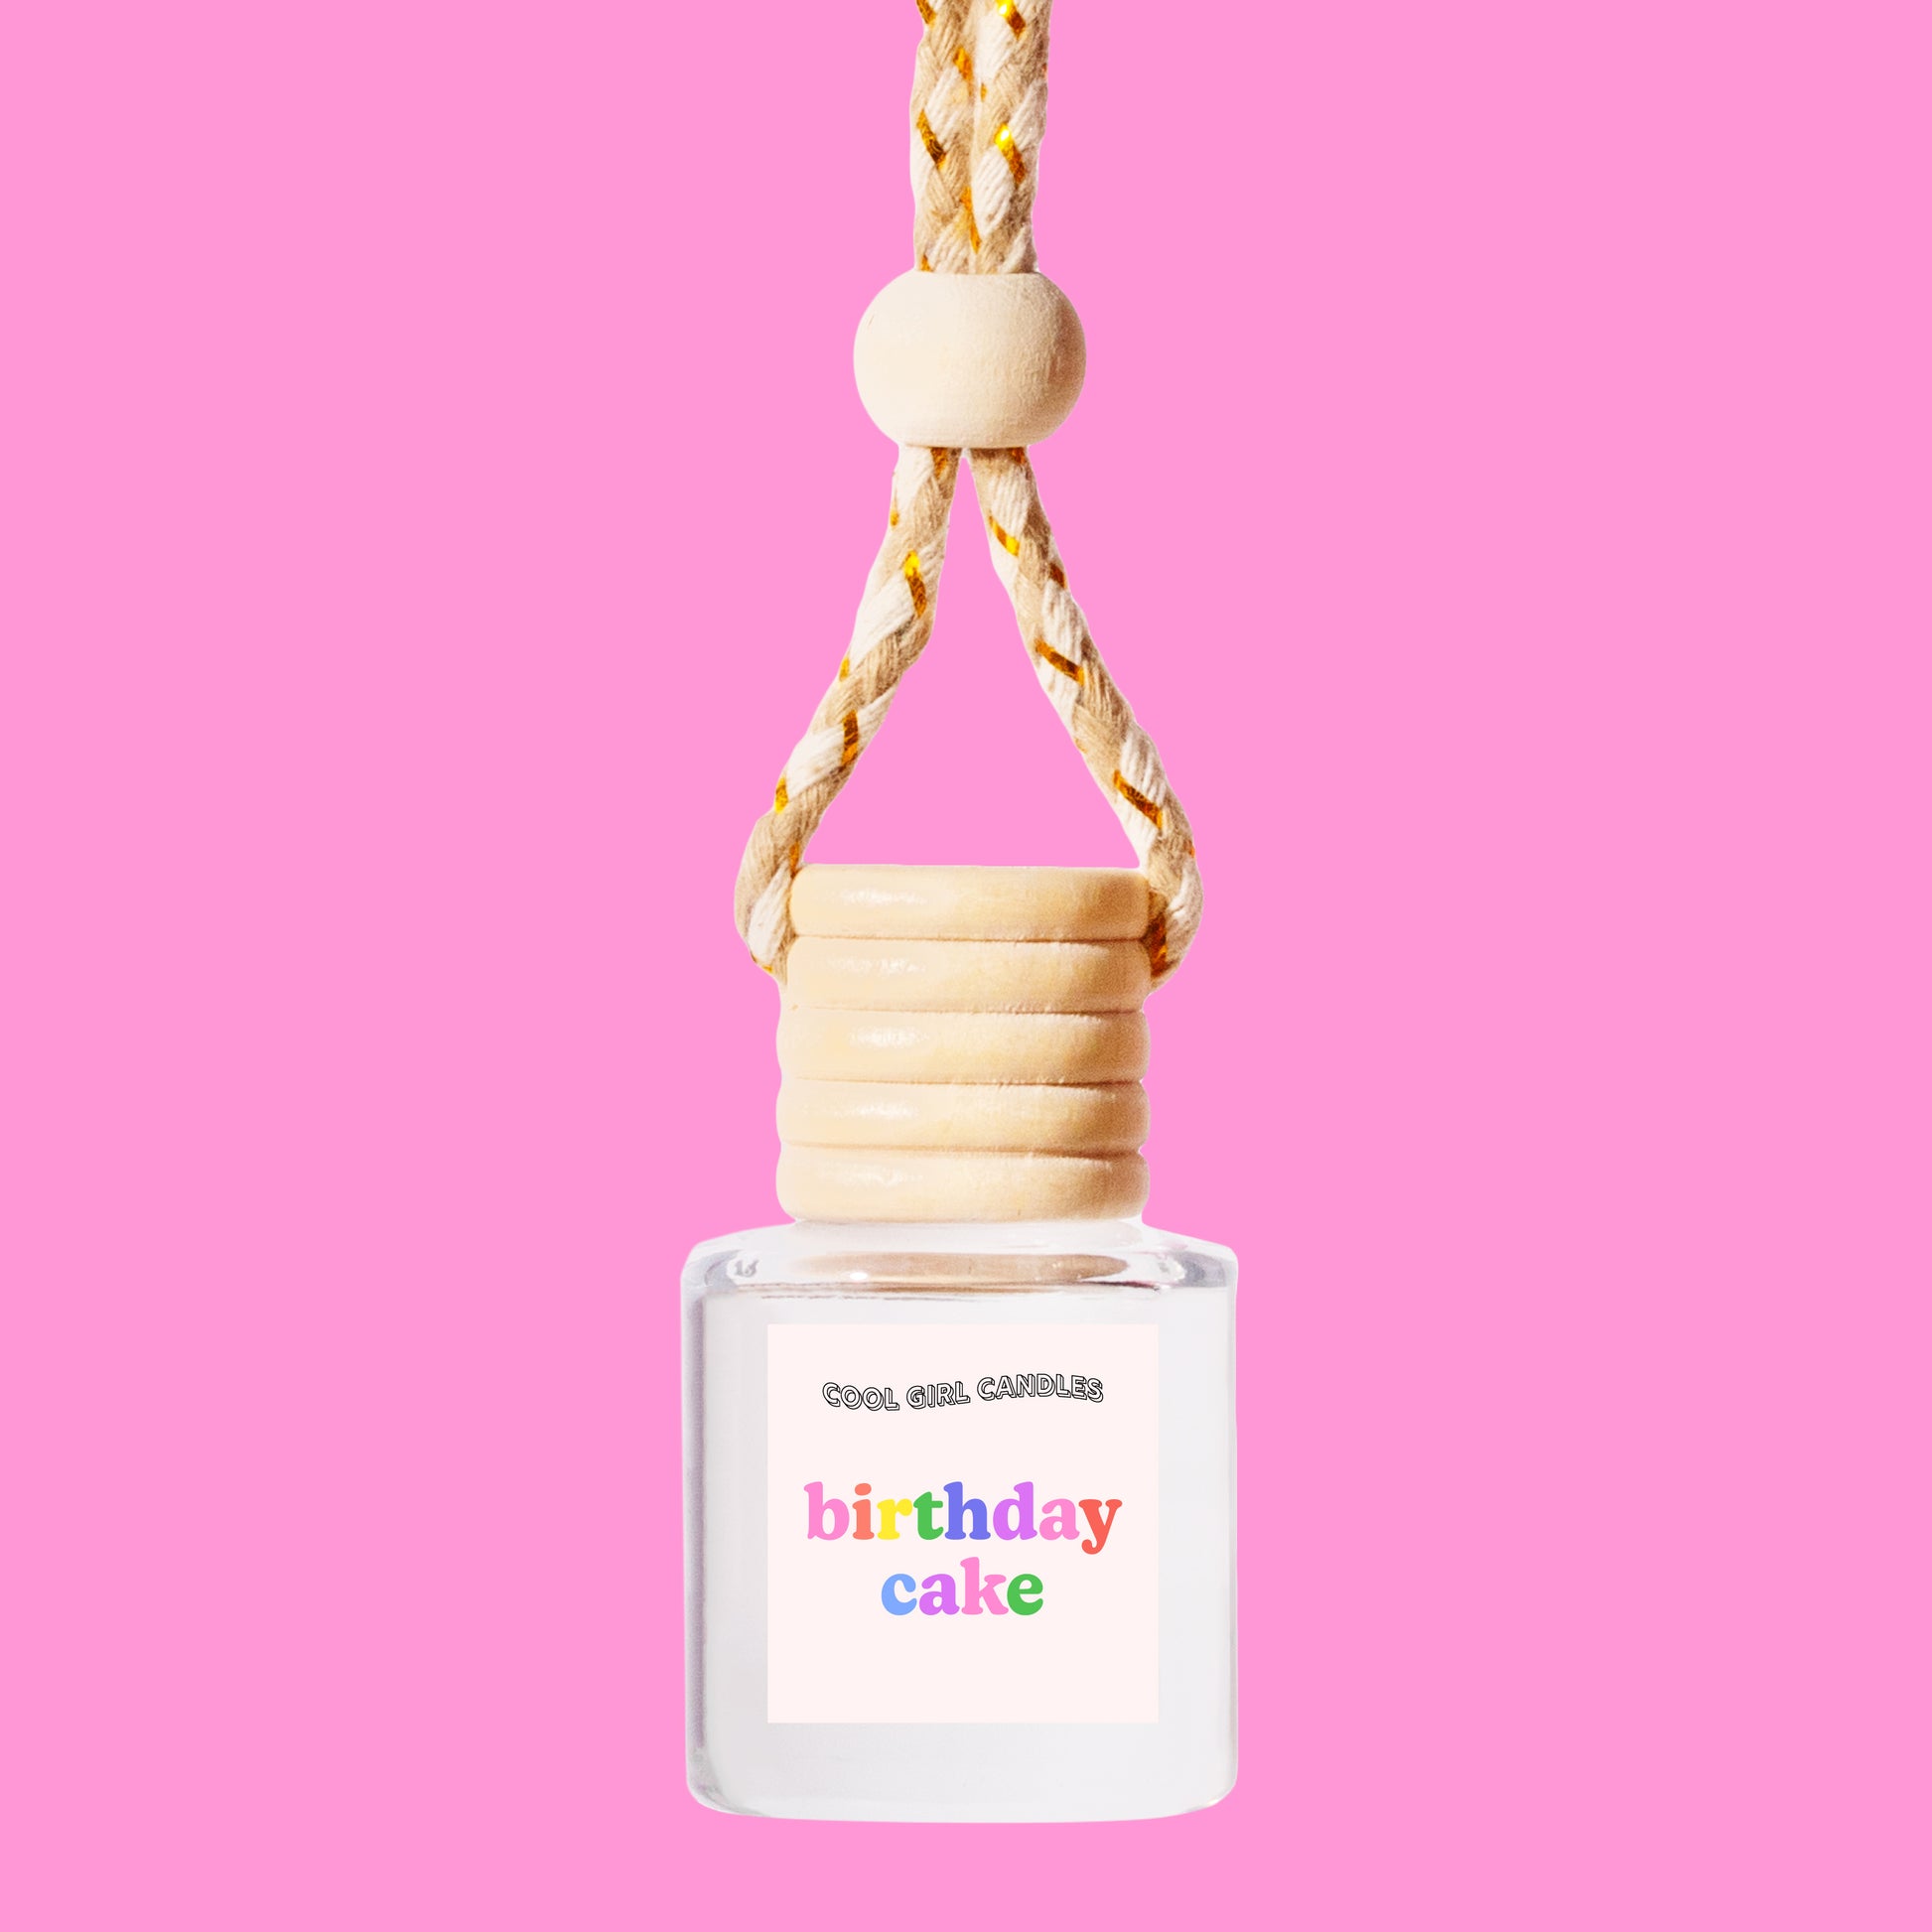 Birthday Cake scented hanging car freshener by cool girl candles